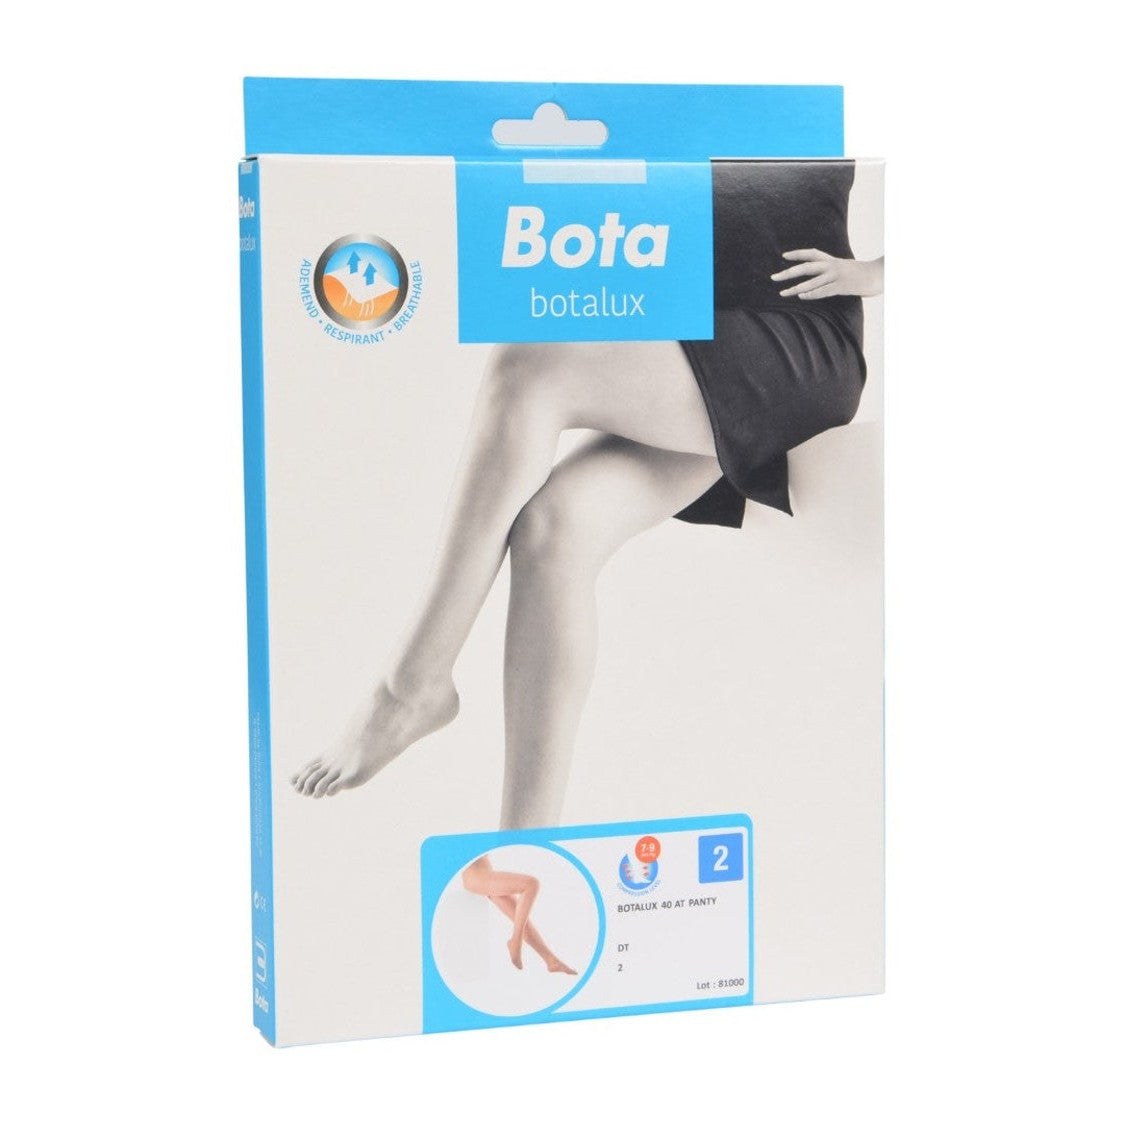 Botalux 40 support tights at dark